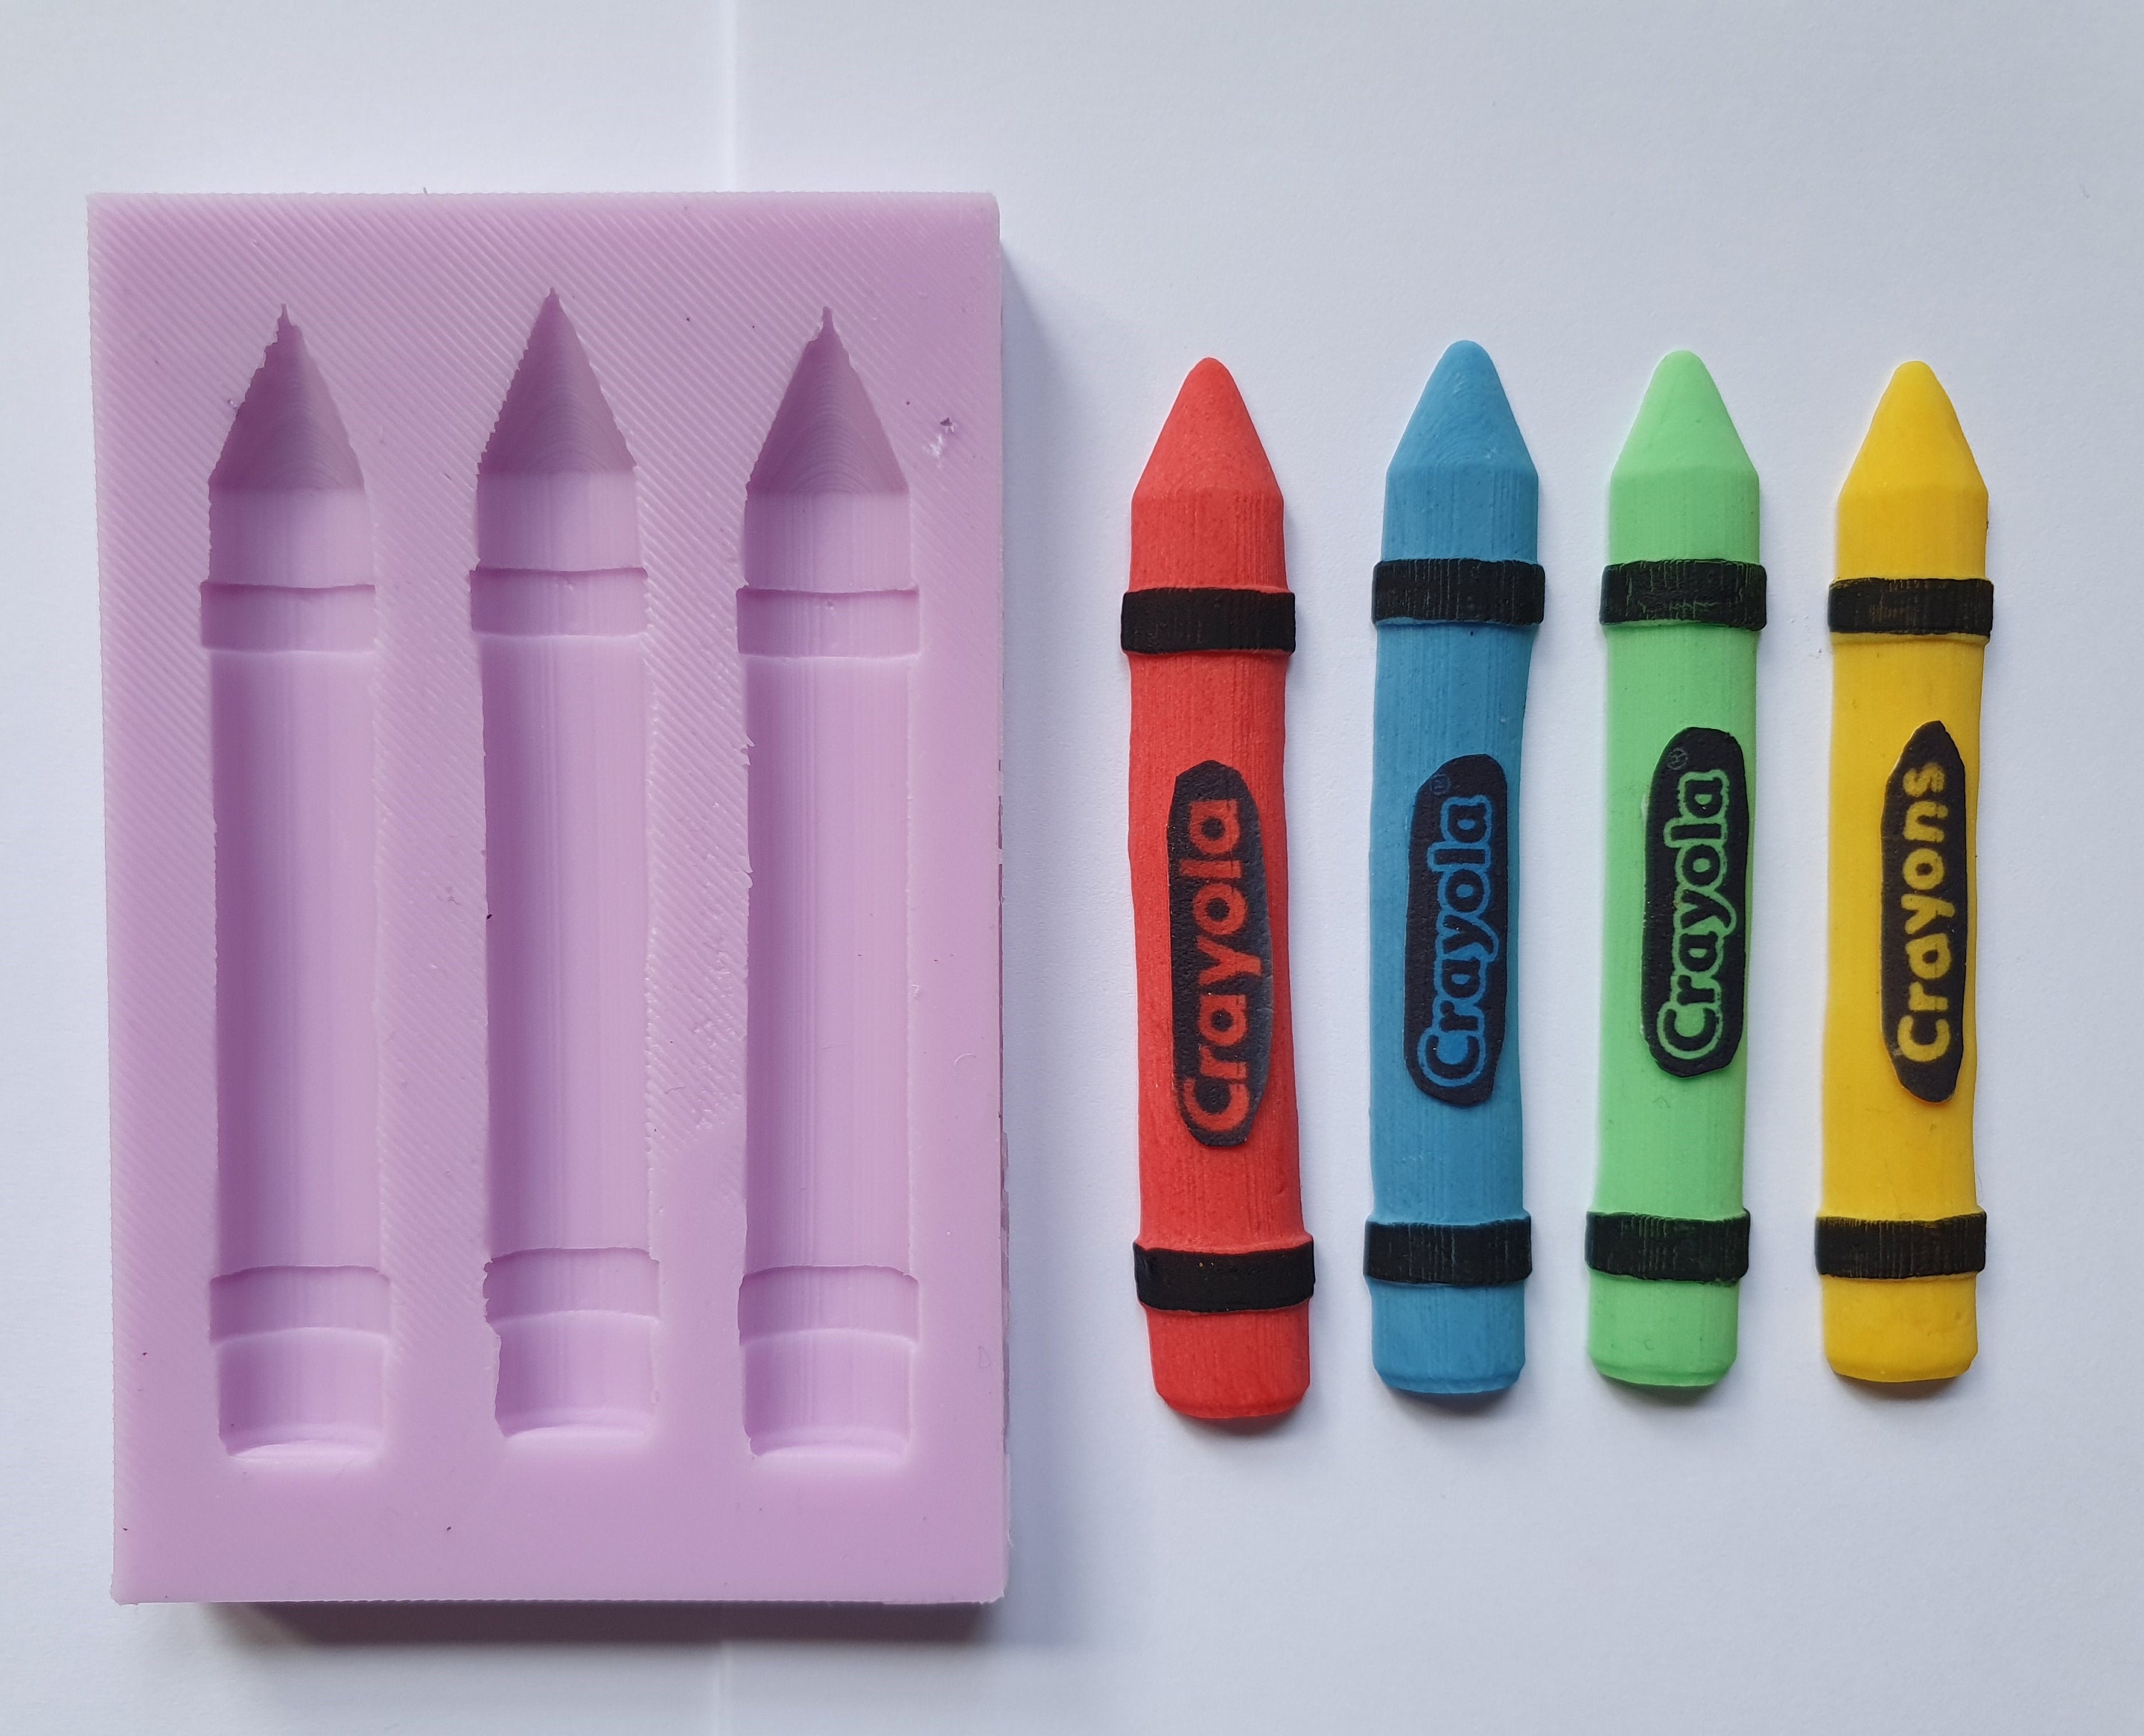 Generic 6 Pcs Crayon Molds Oven Safe Crayon Silicone Mold 3D